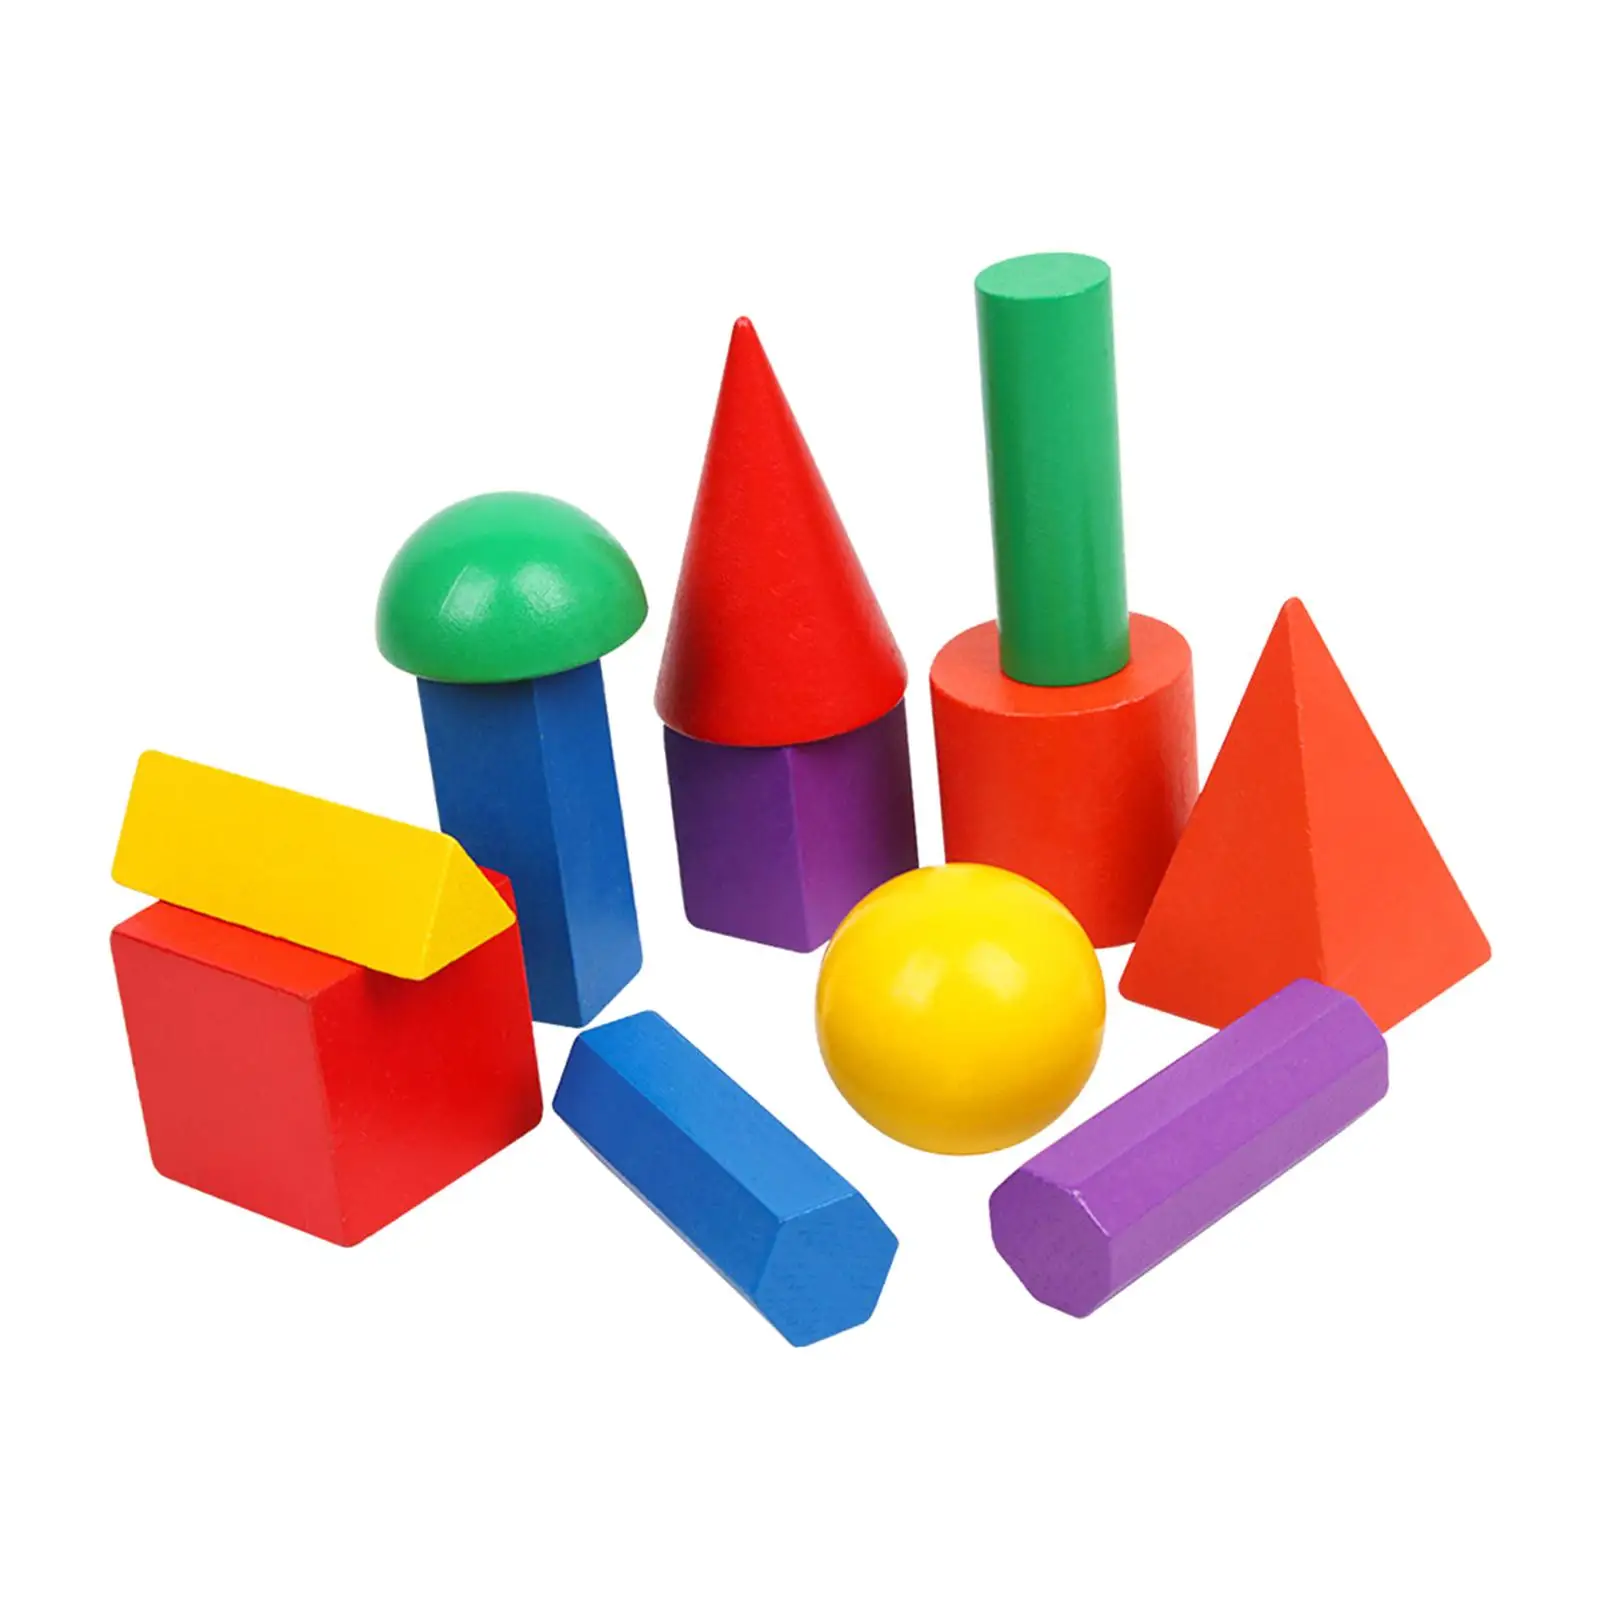 12x Montessori 3D Shapes Geometric Solids Learning Toys Teaching Aids Educational Large Size Pattern Blocks for Preschool Gift